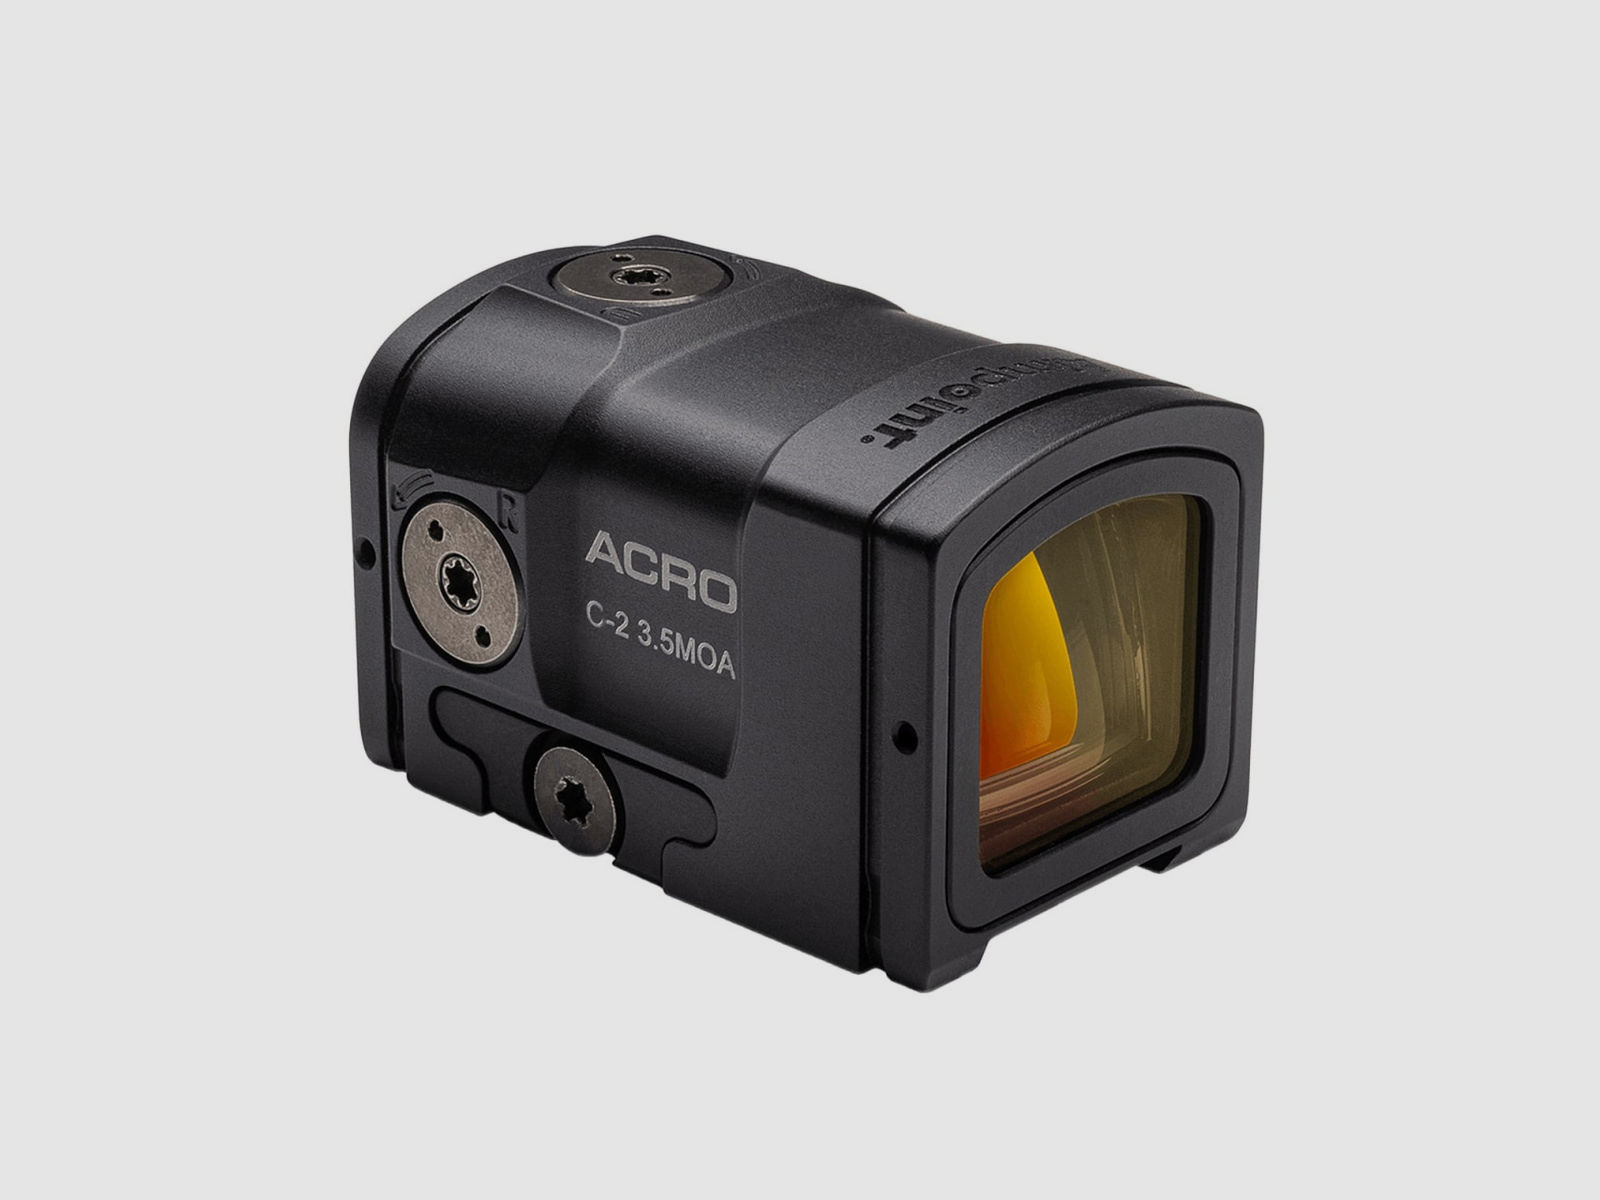 Aimpoint Acro C-2 schwarz inkl. Picatinny Montage Rotpunkt